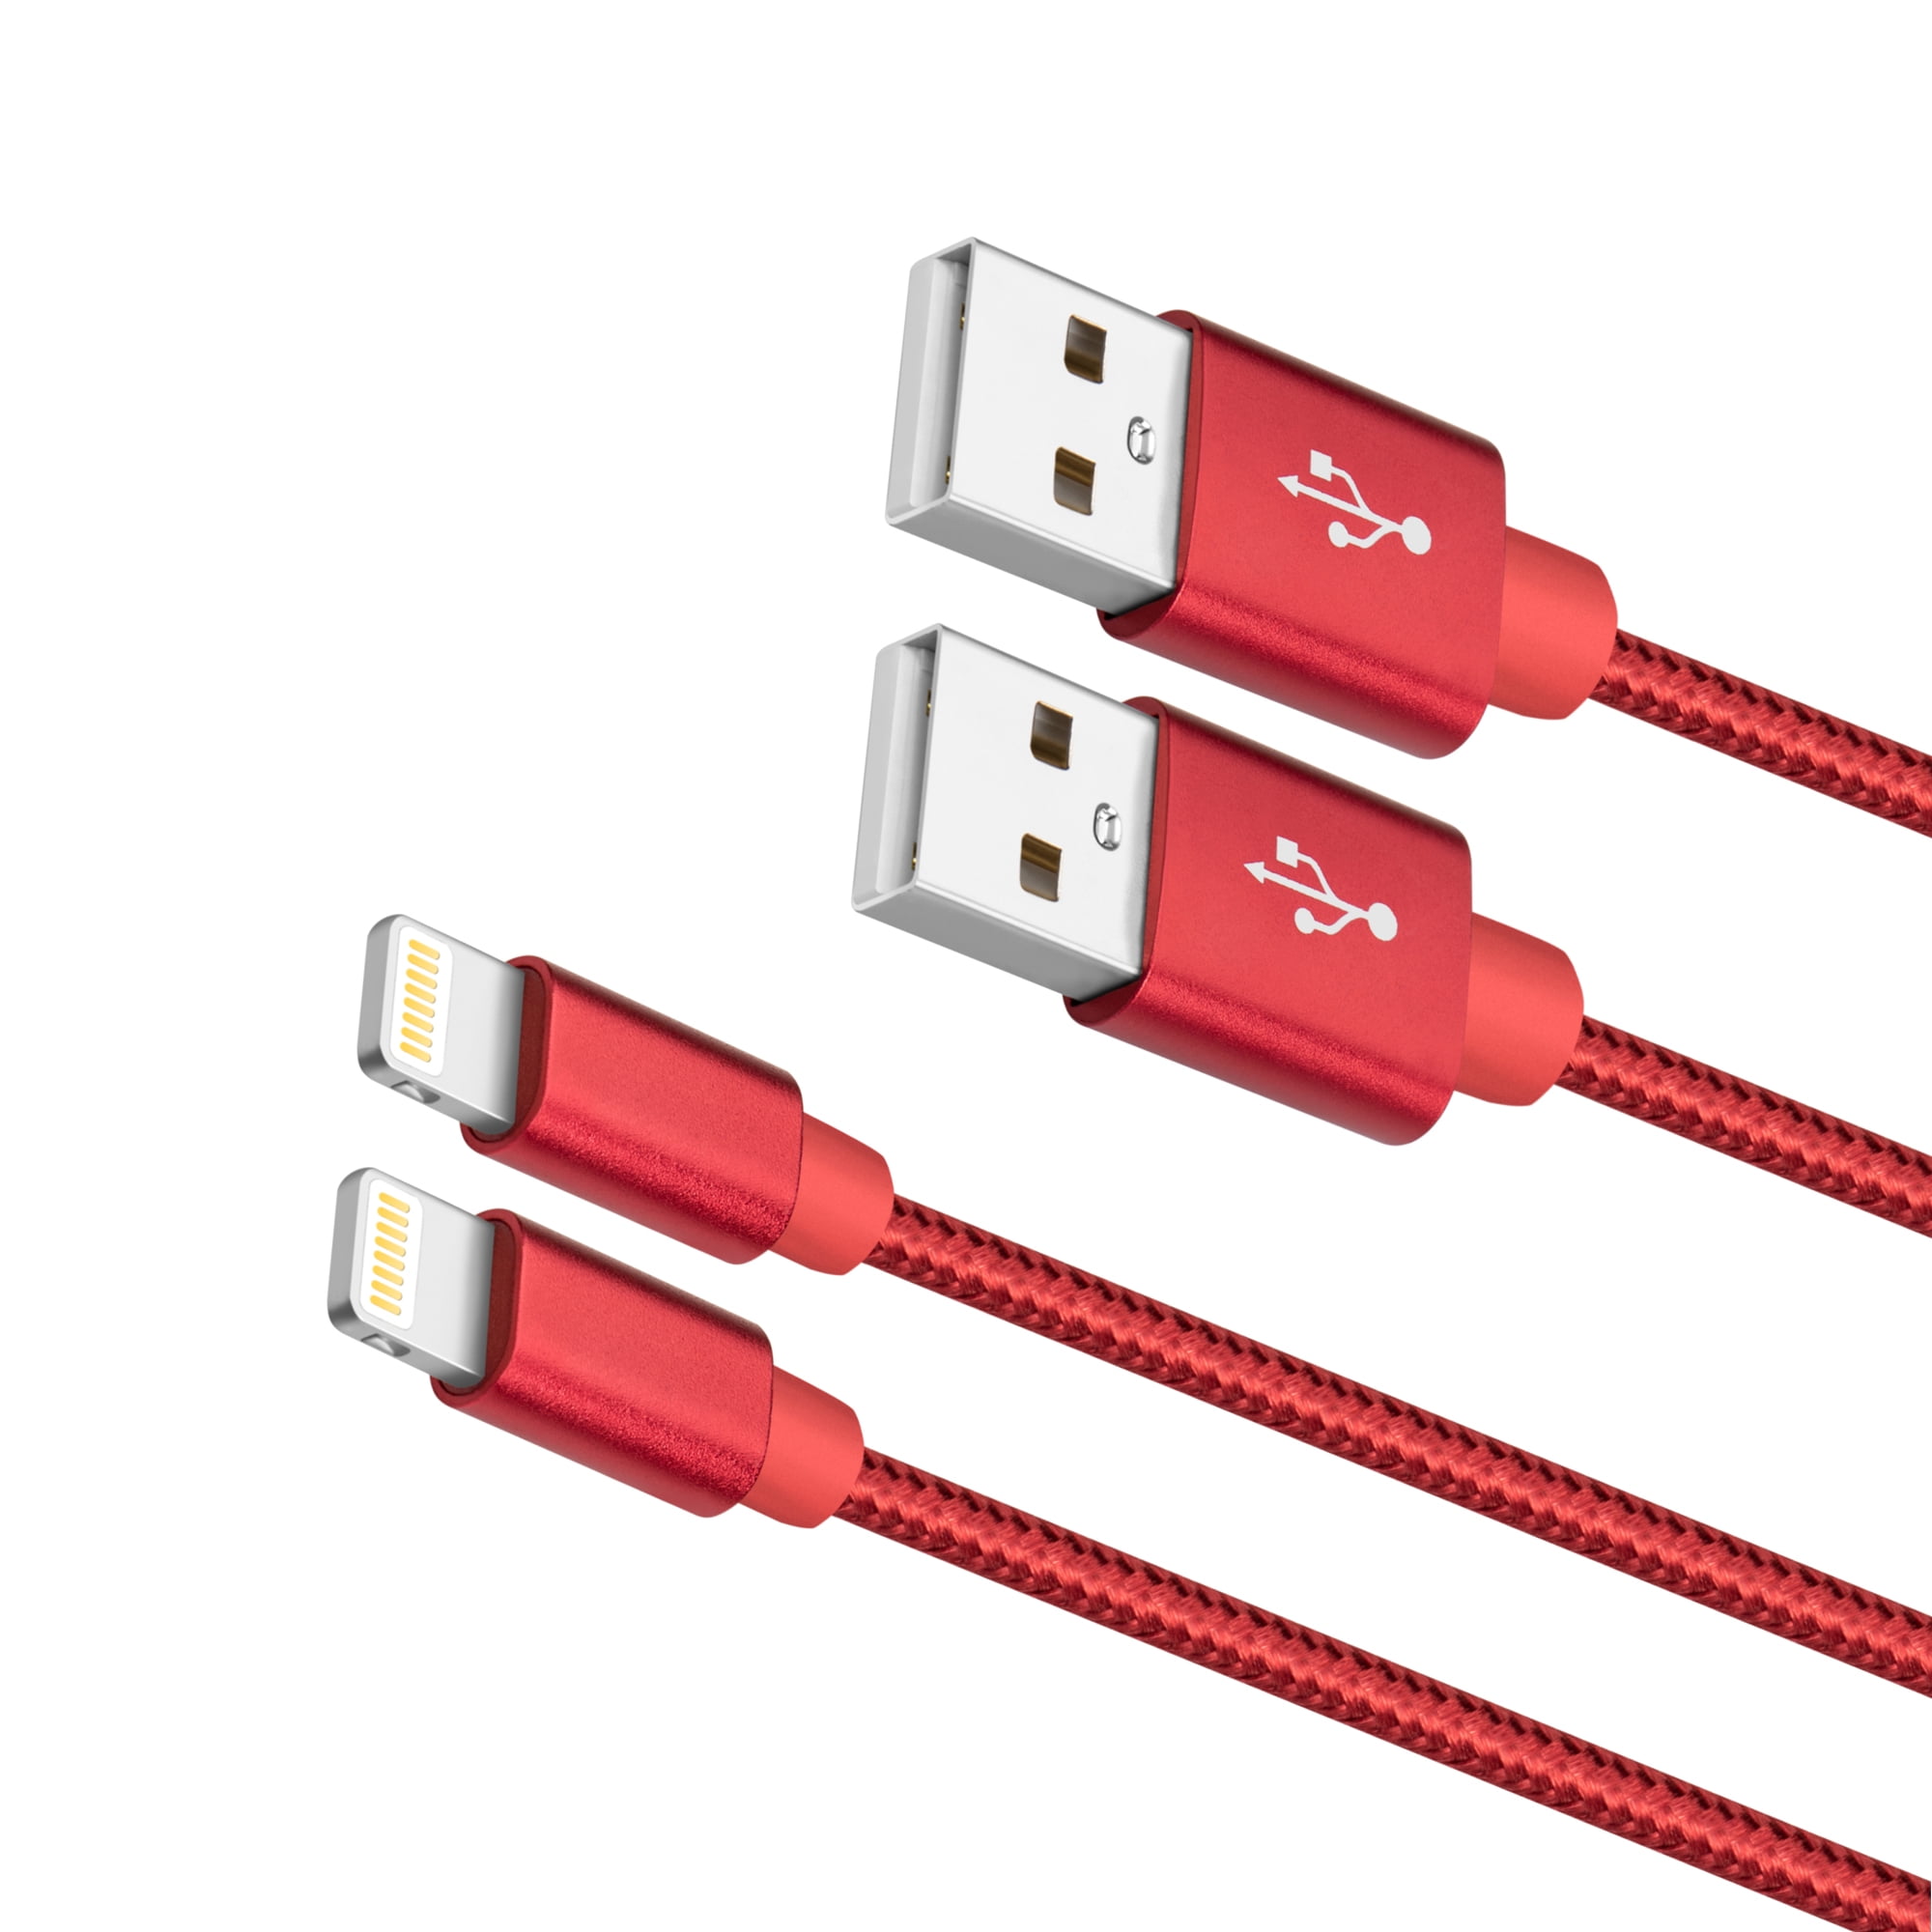 Cargador iPhone, 4-Pack 2M Cable y USB Enchufe per iPhone XR X XS 8 7